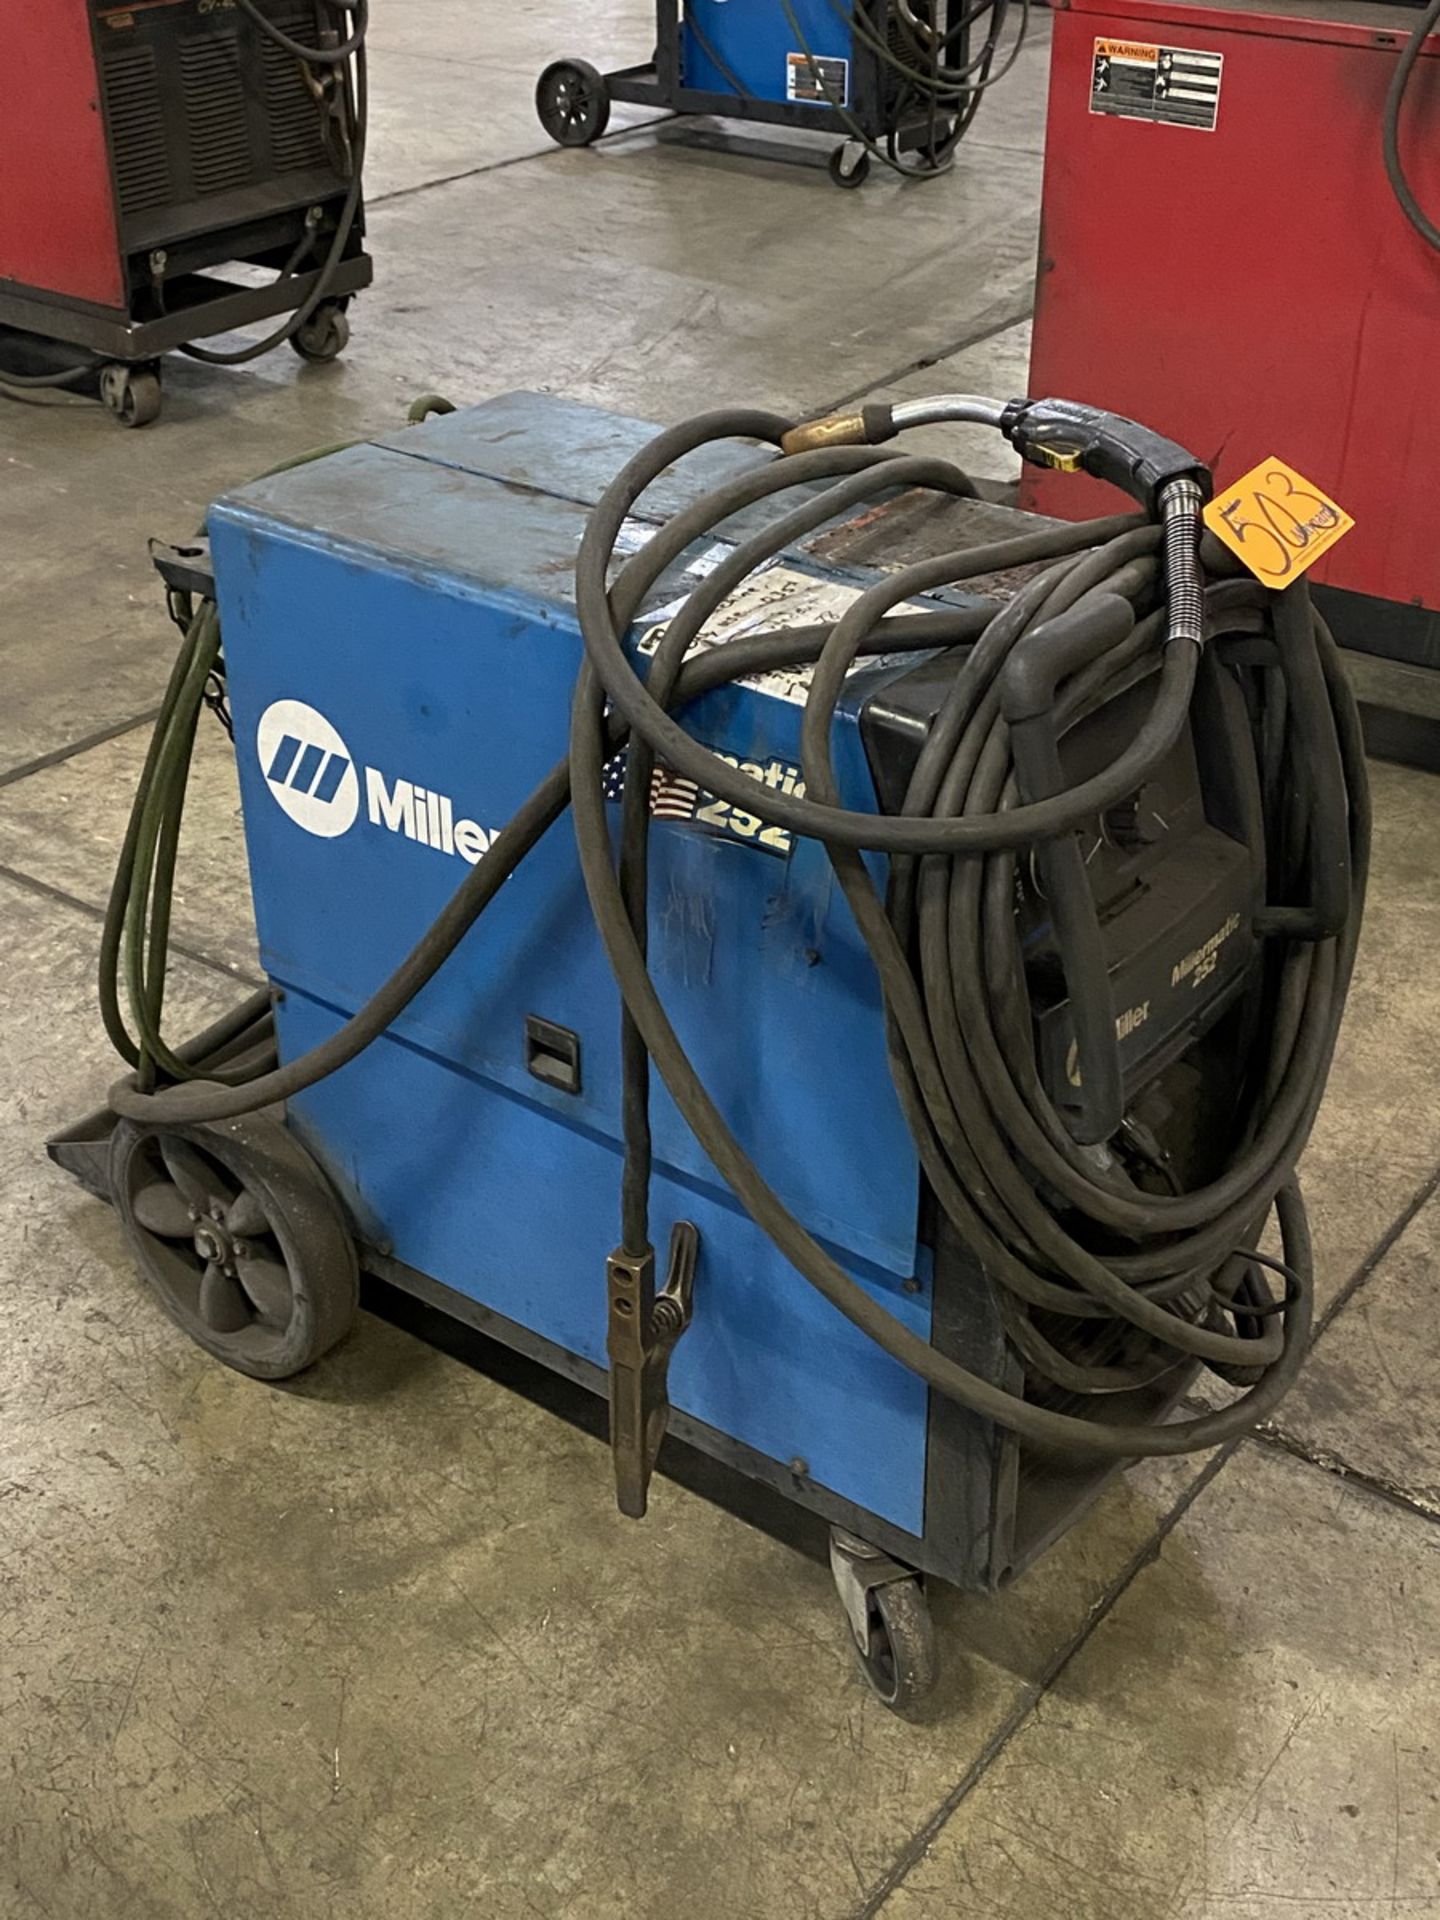 Miller Millermatic 252 Wire Welder Output: 28V, 200A, 60% Duty Cycle - Image 2 of 5